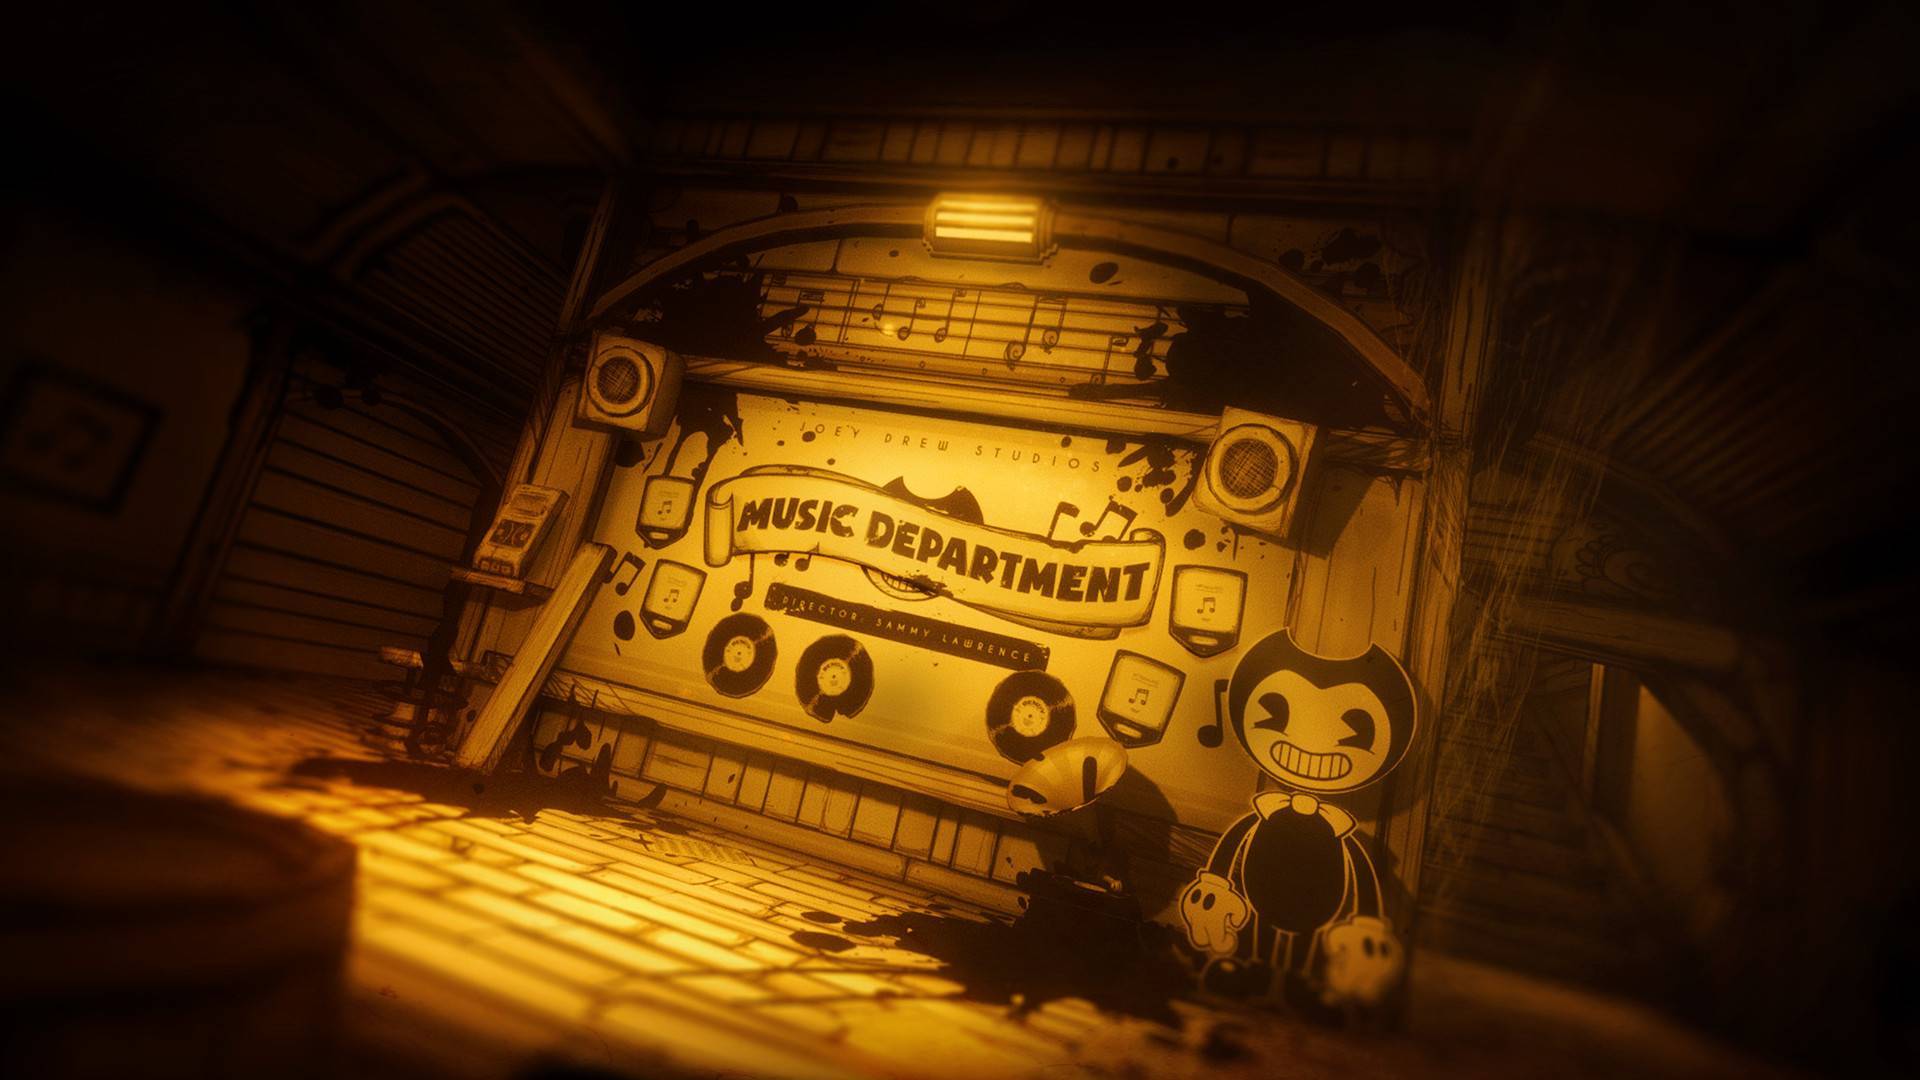 Buy Bendy and the Ink Machine Steam Key GLOBAL - Cheap - !